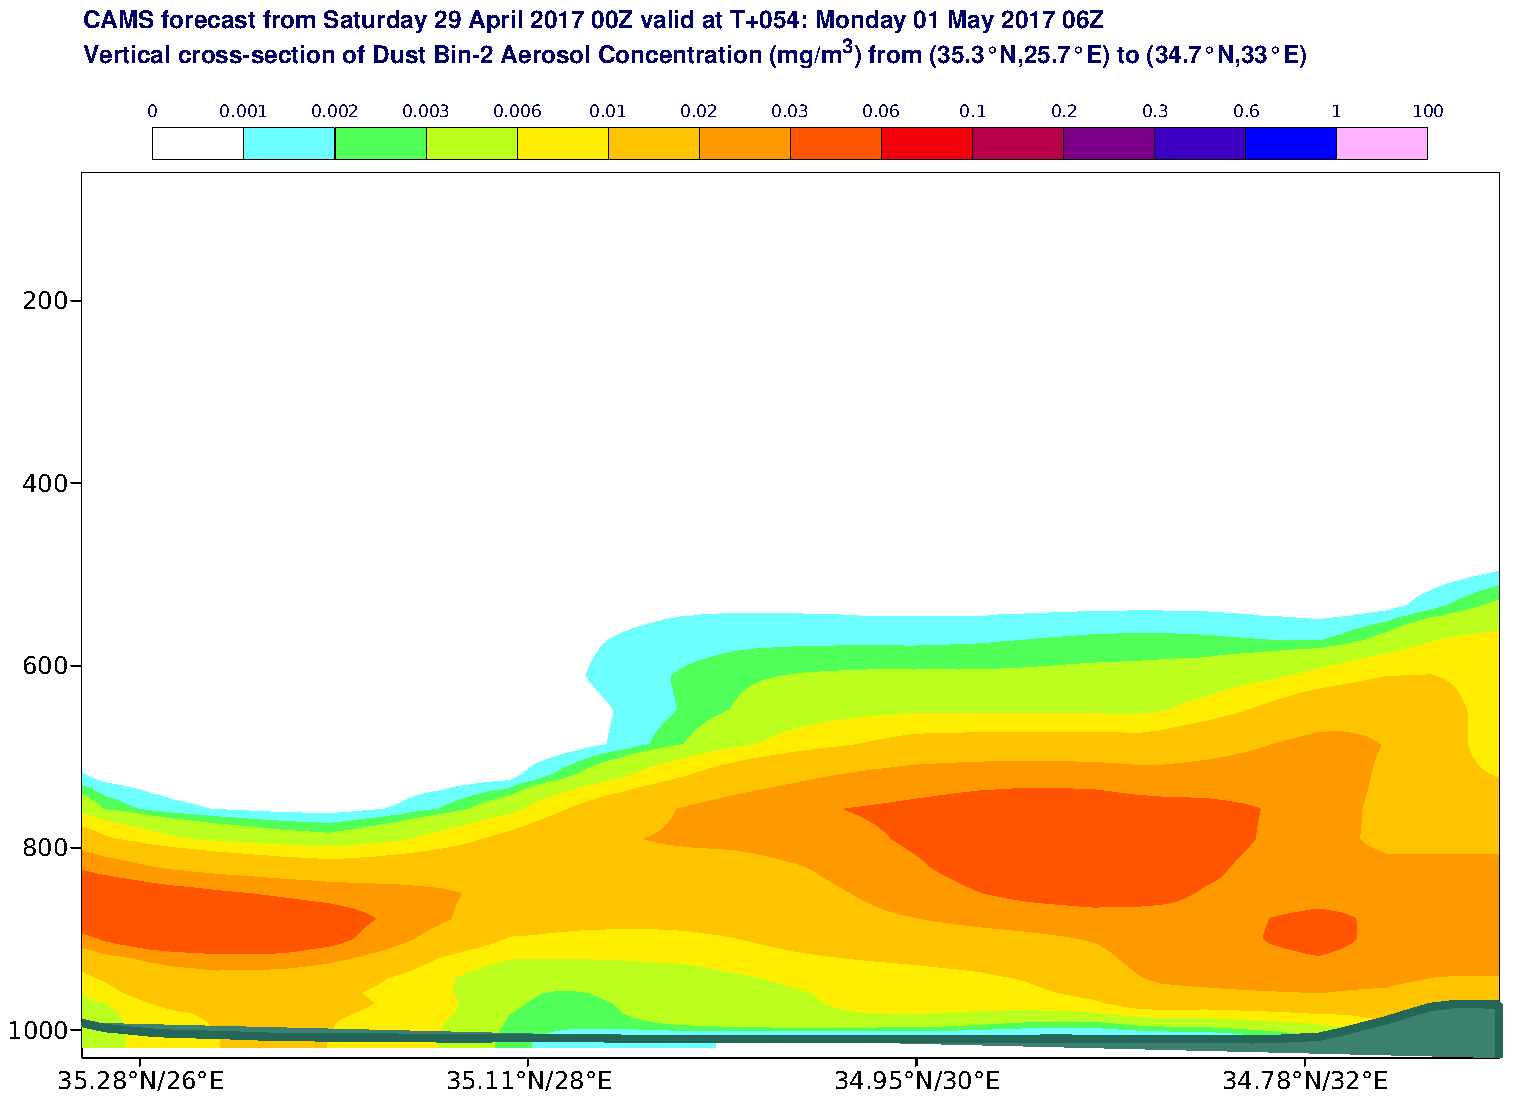 Vertical cross-section of Dust Bin-2 Aerosol Concentration (mg/m3) valid at T54 - 2017-05-01 06:00